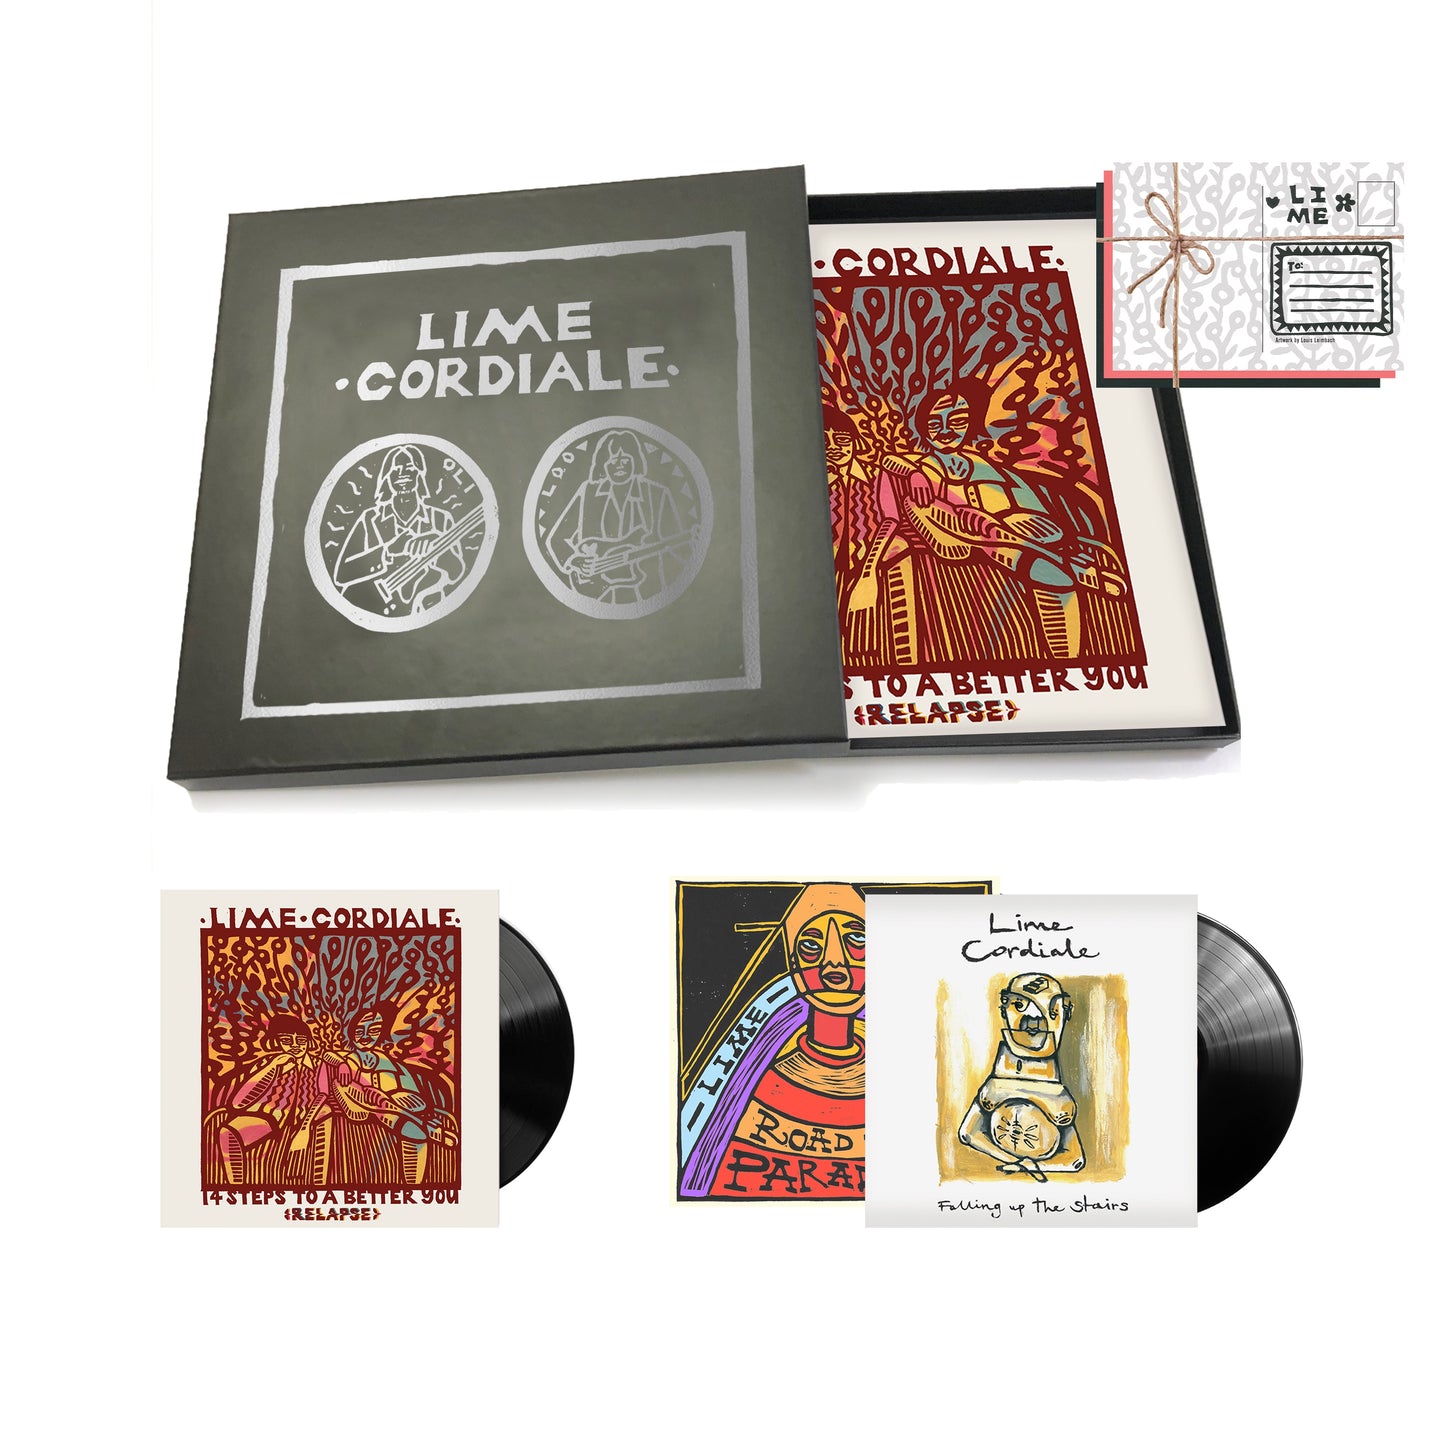 NEW - Lime Cordiale, Relapse Box Set 2LP